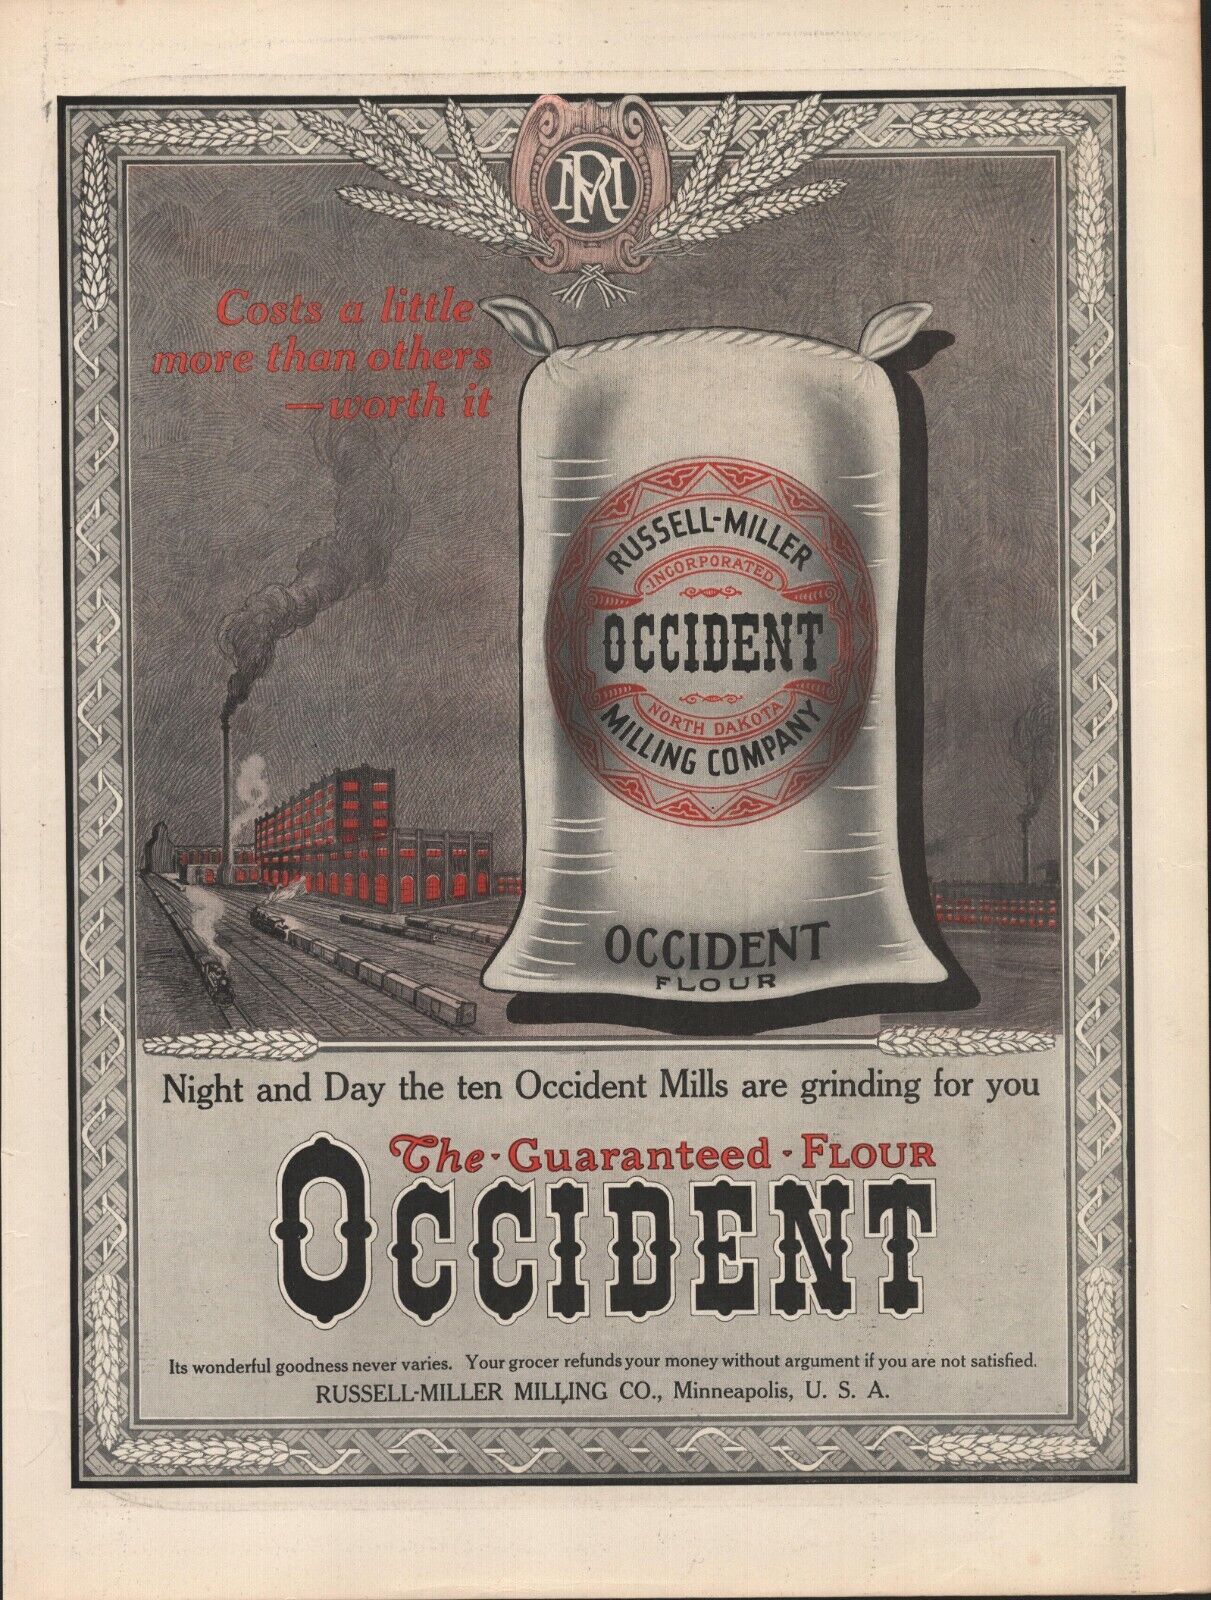 Occident Flour - 1913 - Russell-Miller Milling Co. - Magazine Advertisement